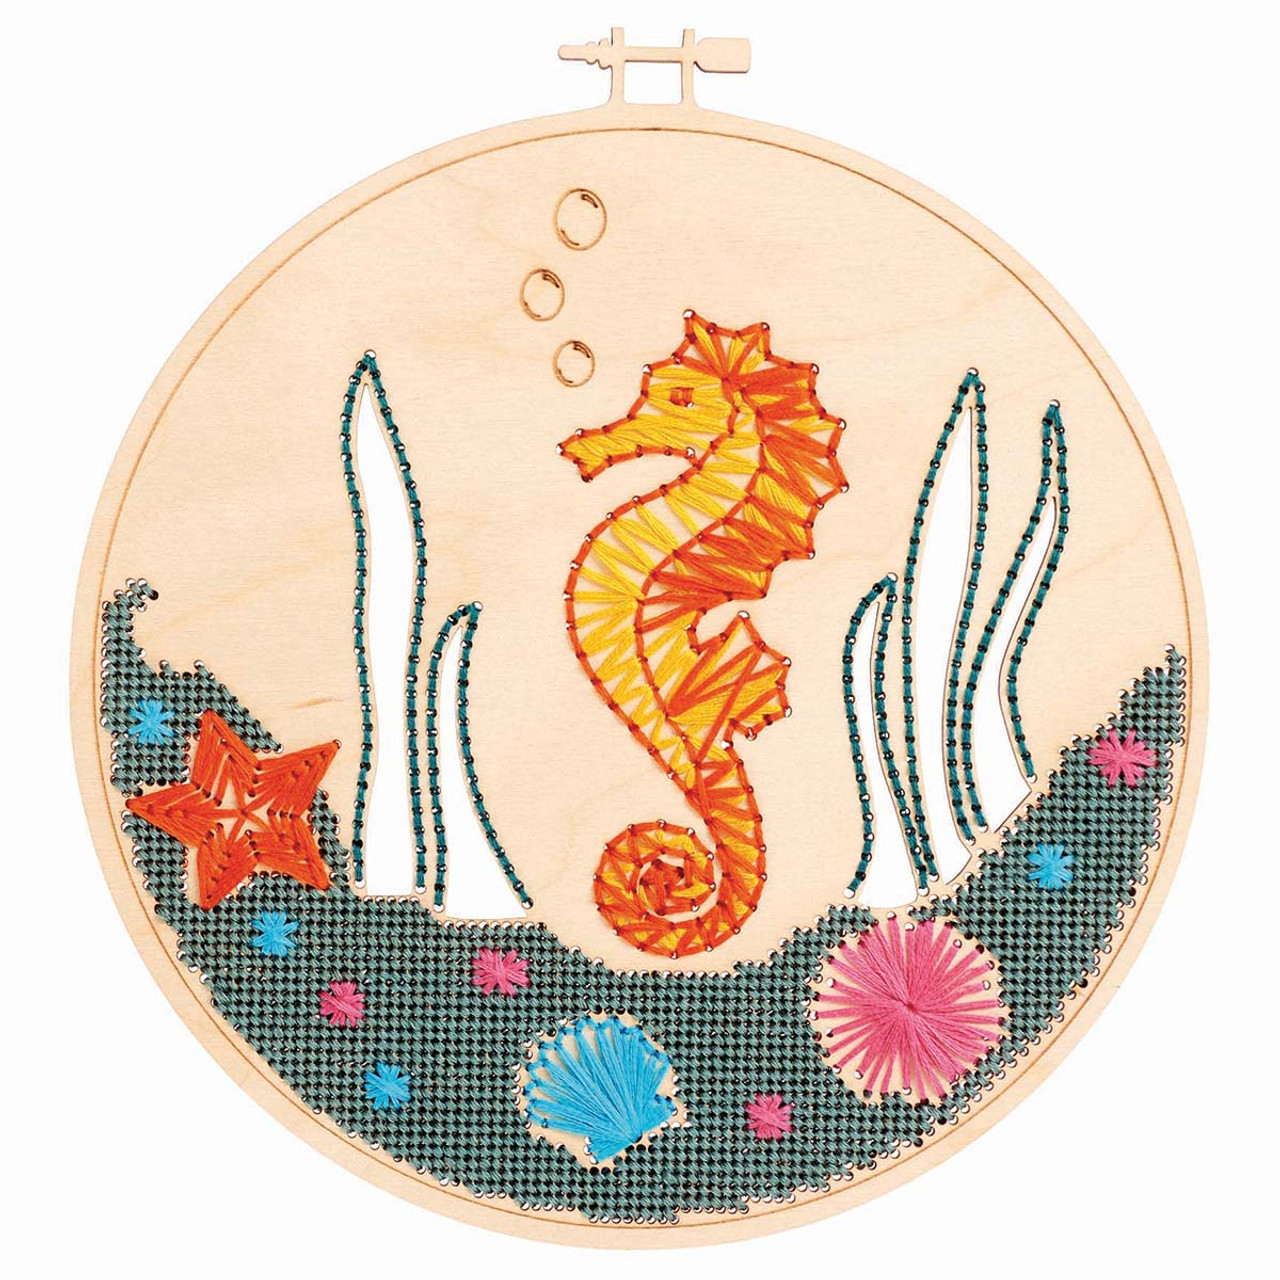 Stocking - Seahorse Decorating the Tree hand-painted needlepoint stitching  canvas, Needlepoint Canvases & Threads